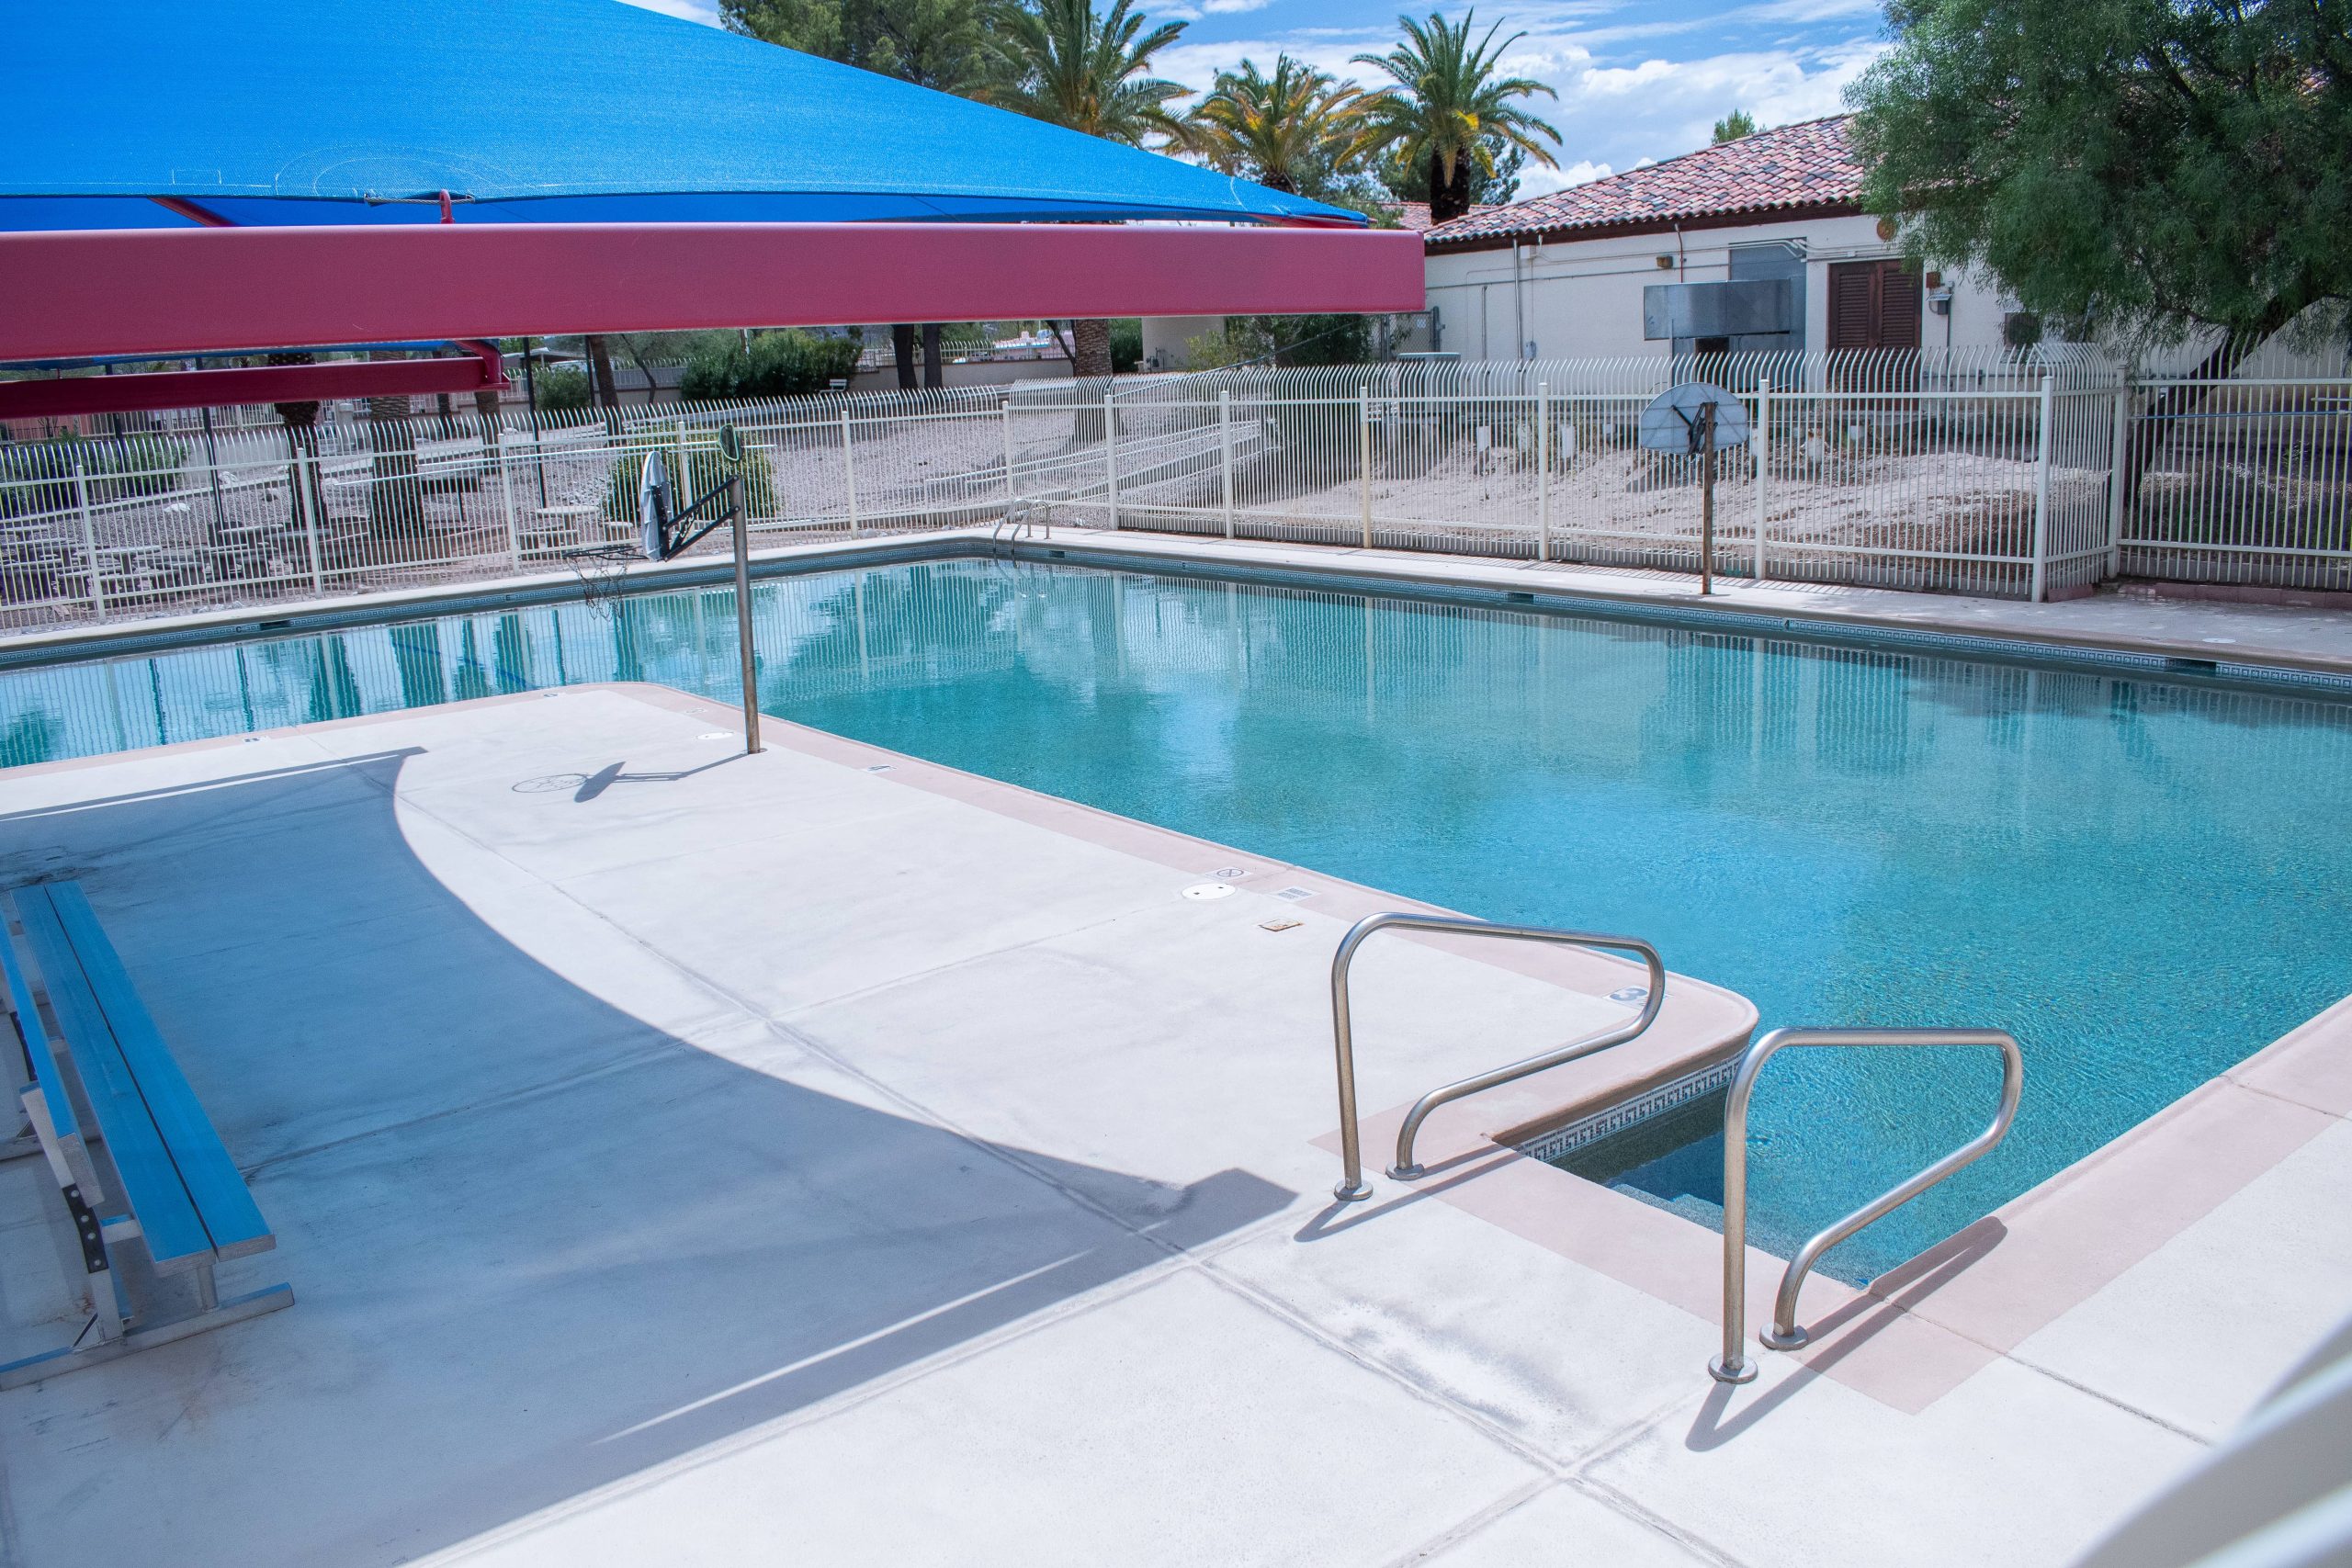 A wide photo of the swimming pool on ASDB campus. The pool has two entrances/exits, and vaguely resembles a right angle. Just beside the pool is a large, blue overhang shading the concrete walkway.